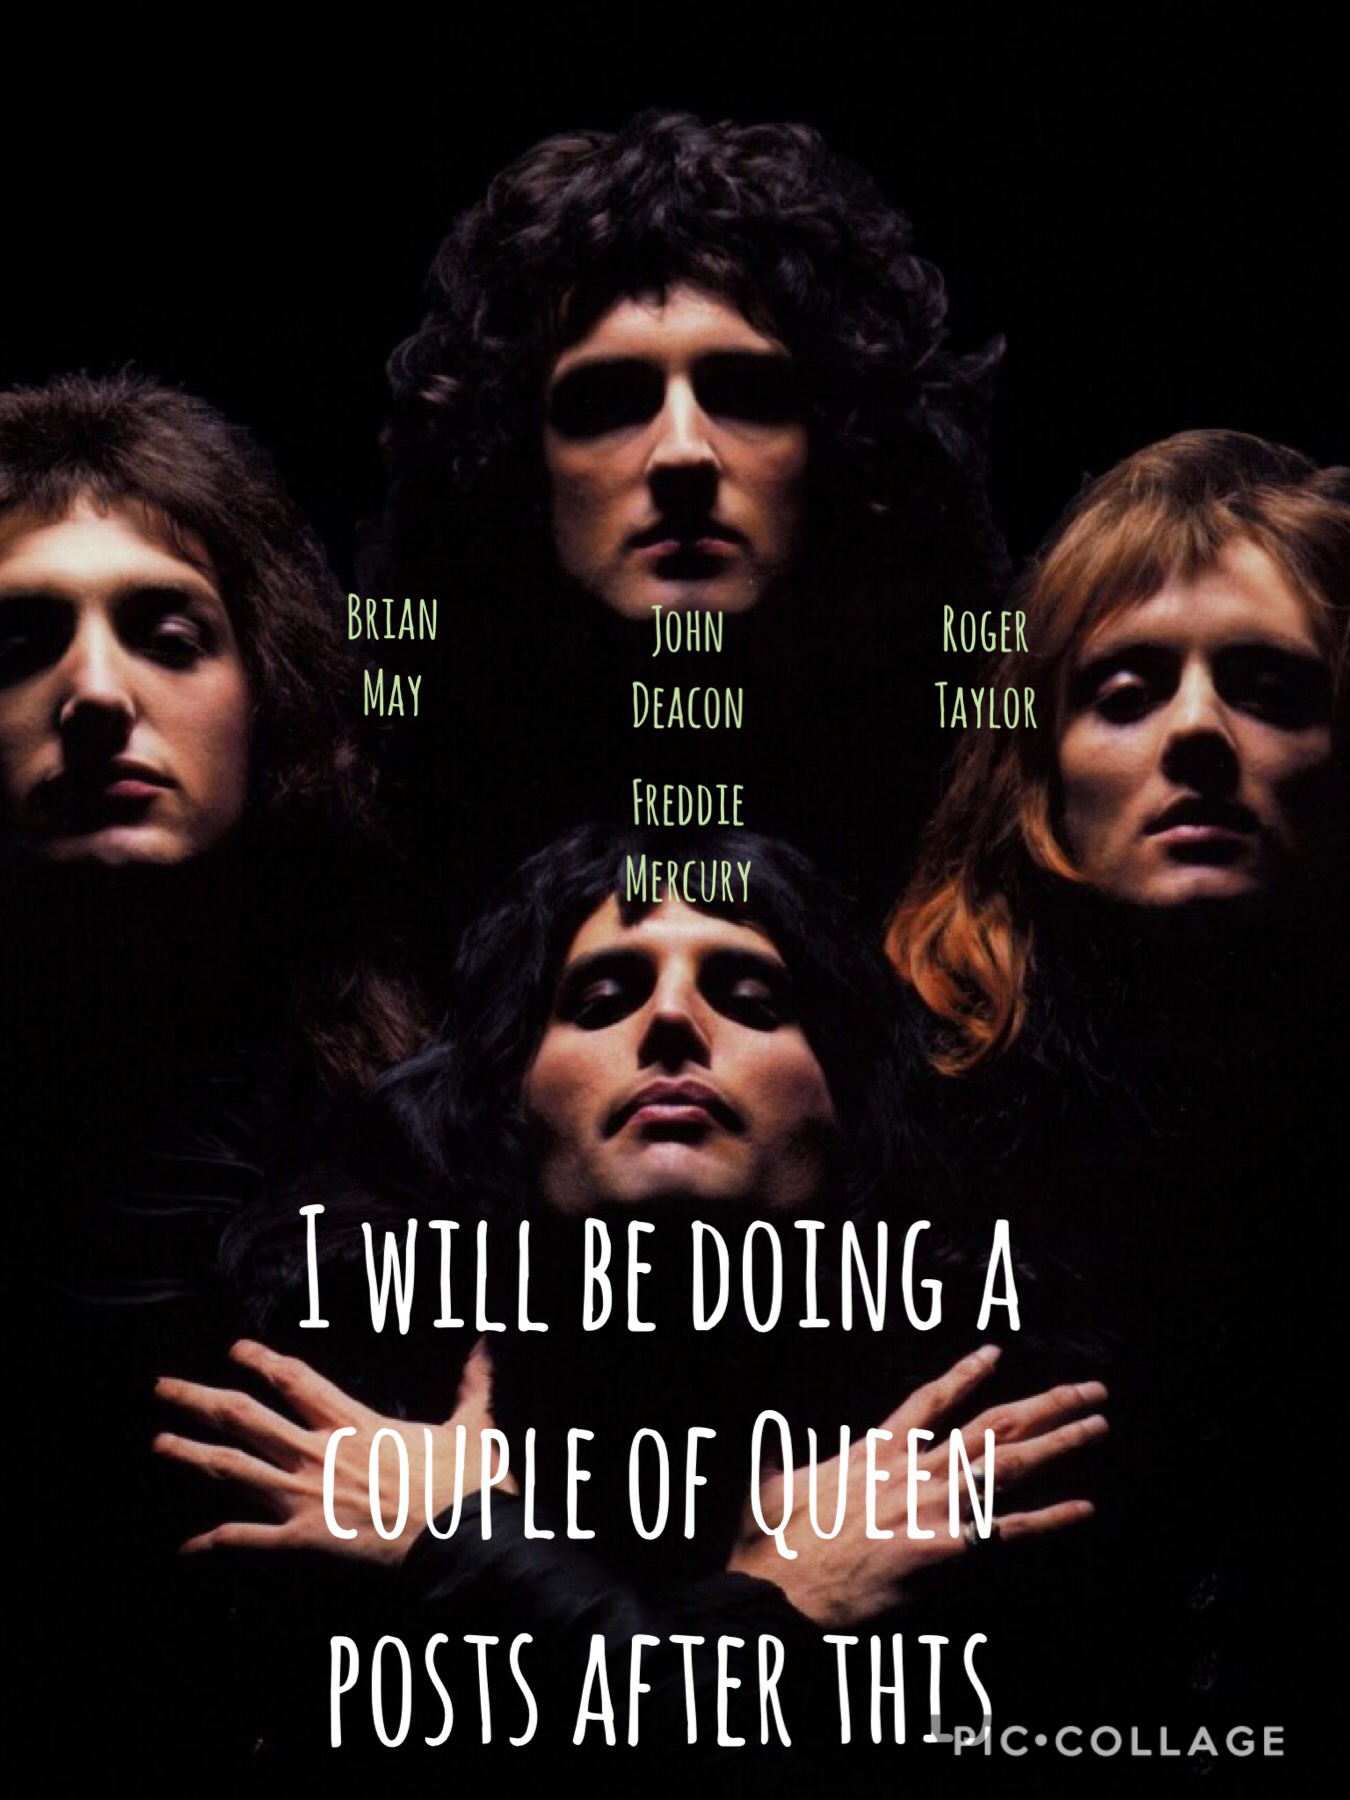 Who else loves queen! Comment if you have seen the movie Bohemian Rapsody